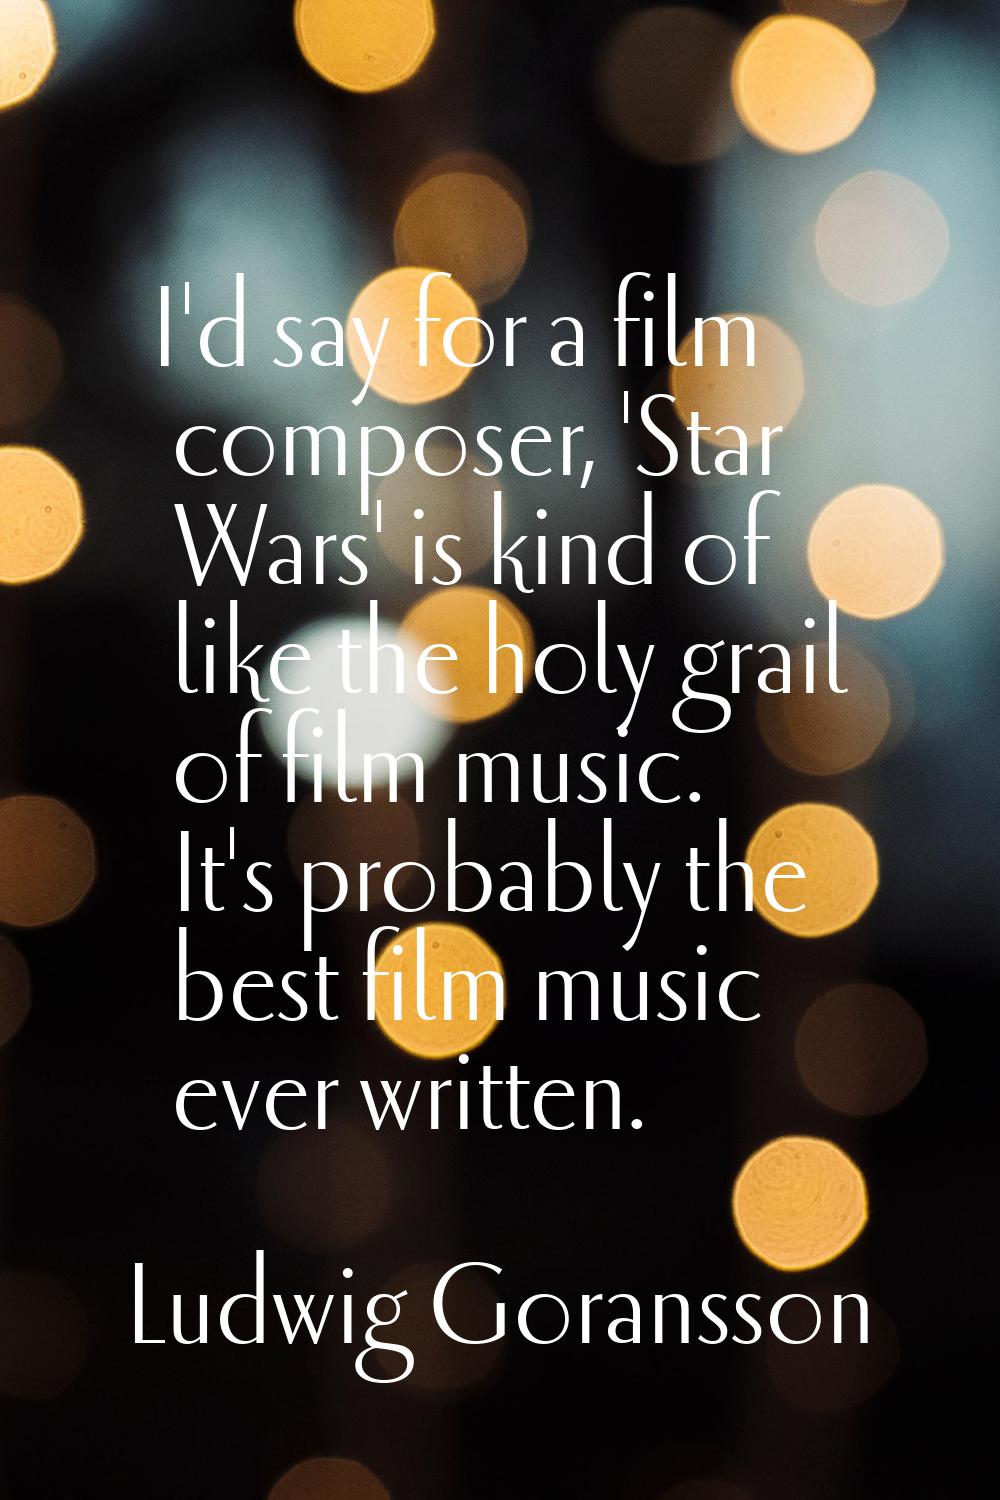 I'd say for a film composer, 'Star Wars' is kind of like the holy grail of film music. It's probabl